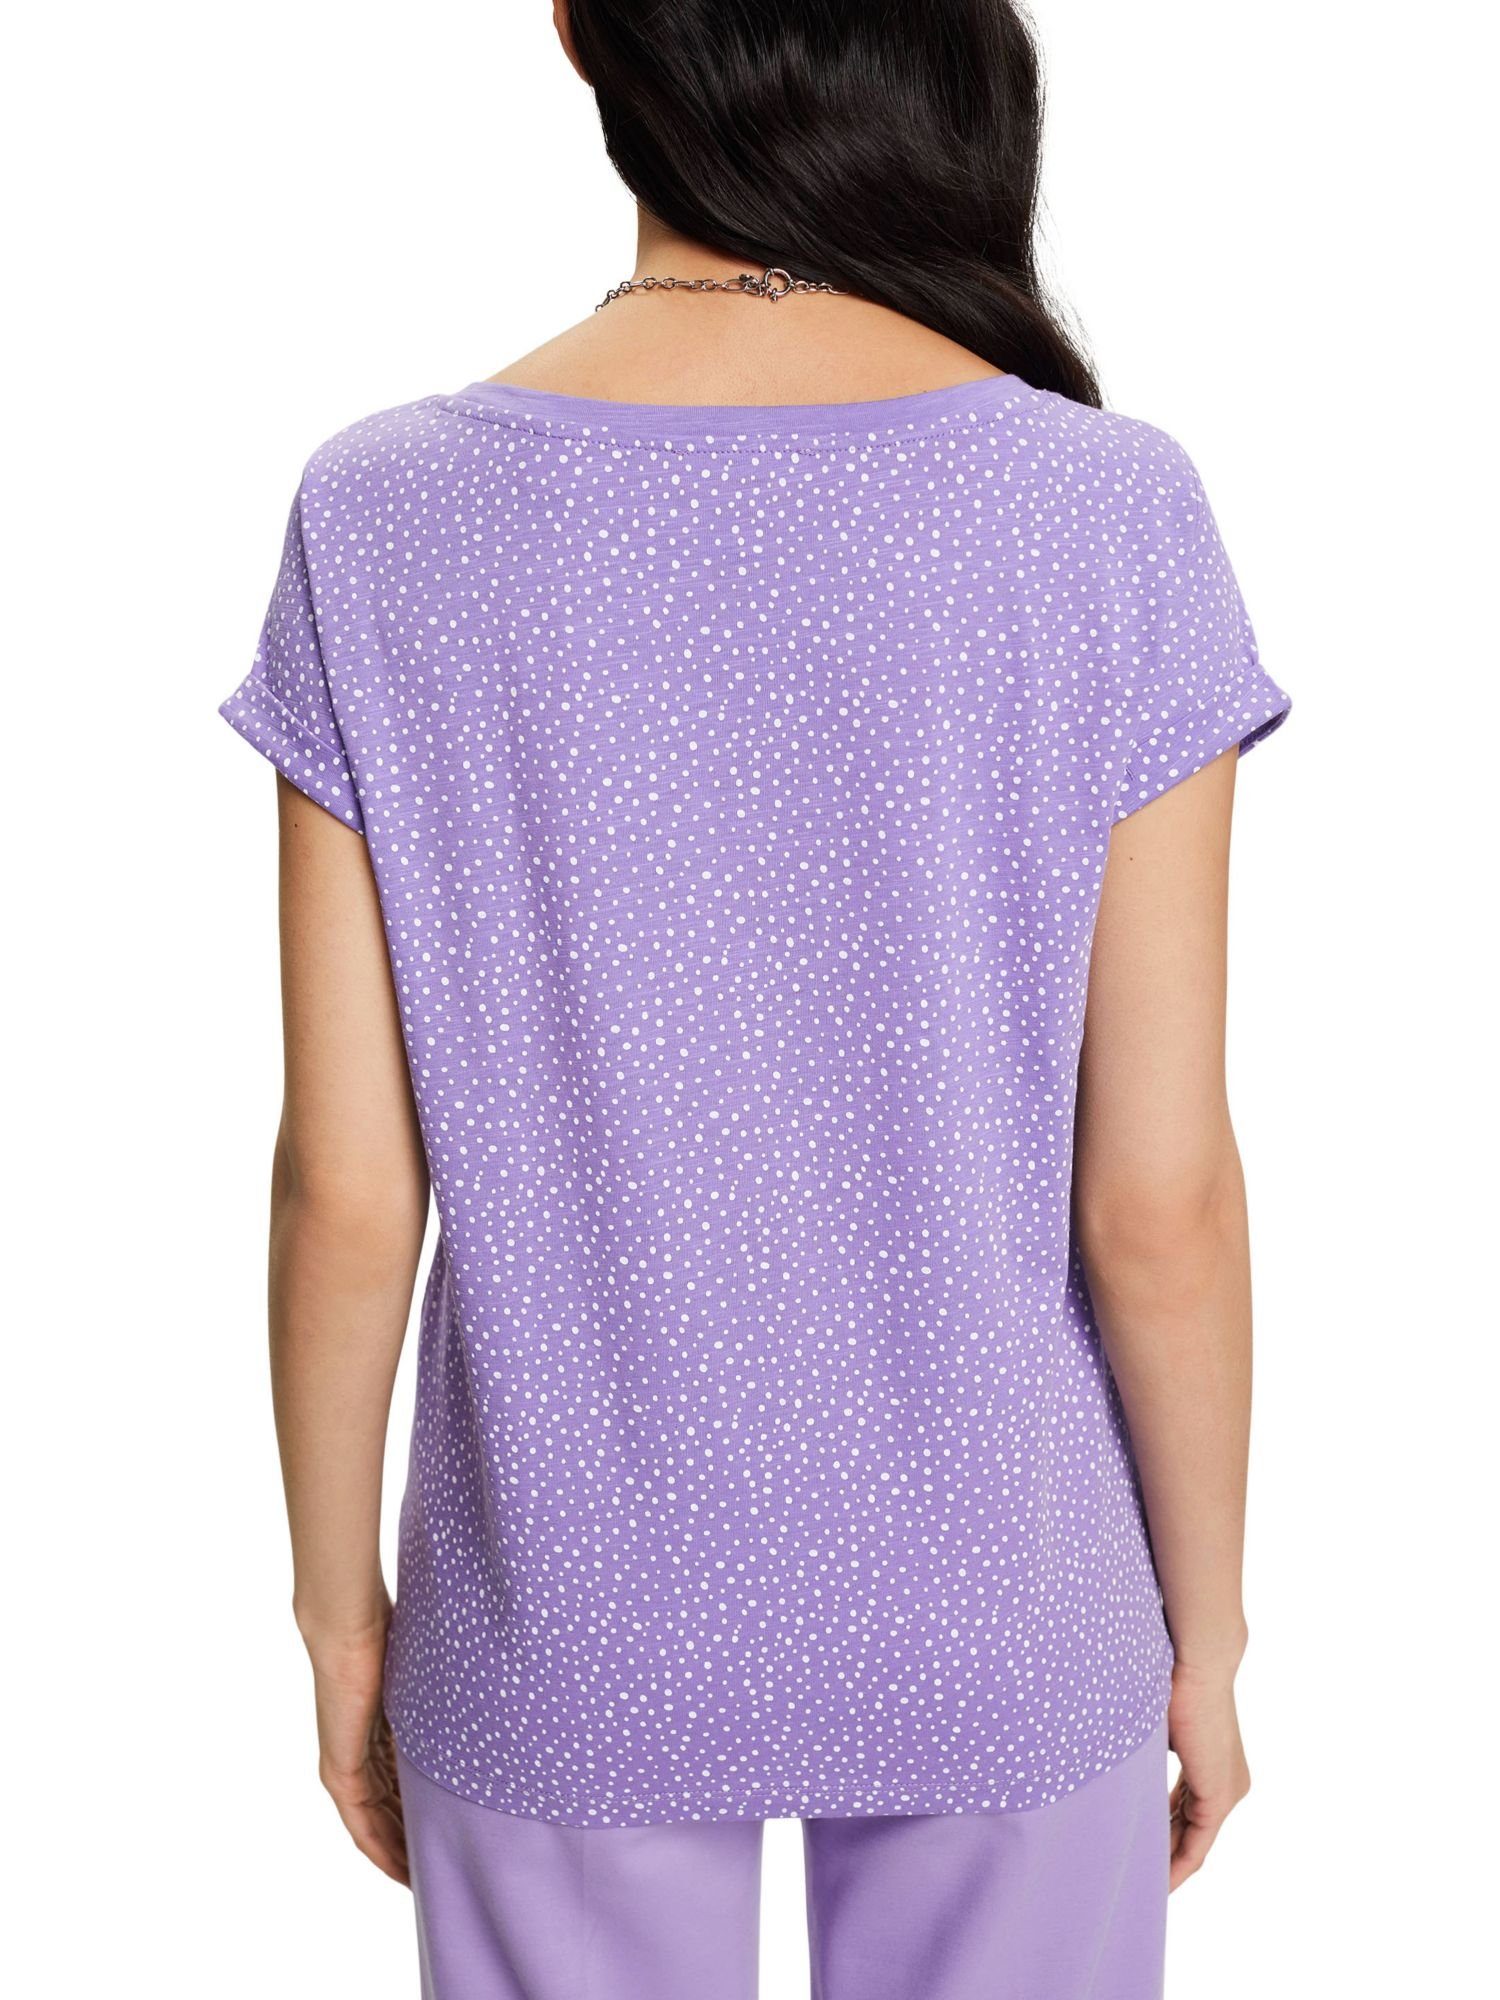 T-Shirt PURPLE mit by Esprit Allover-Muster T-Shirt (1-tlg) edc